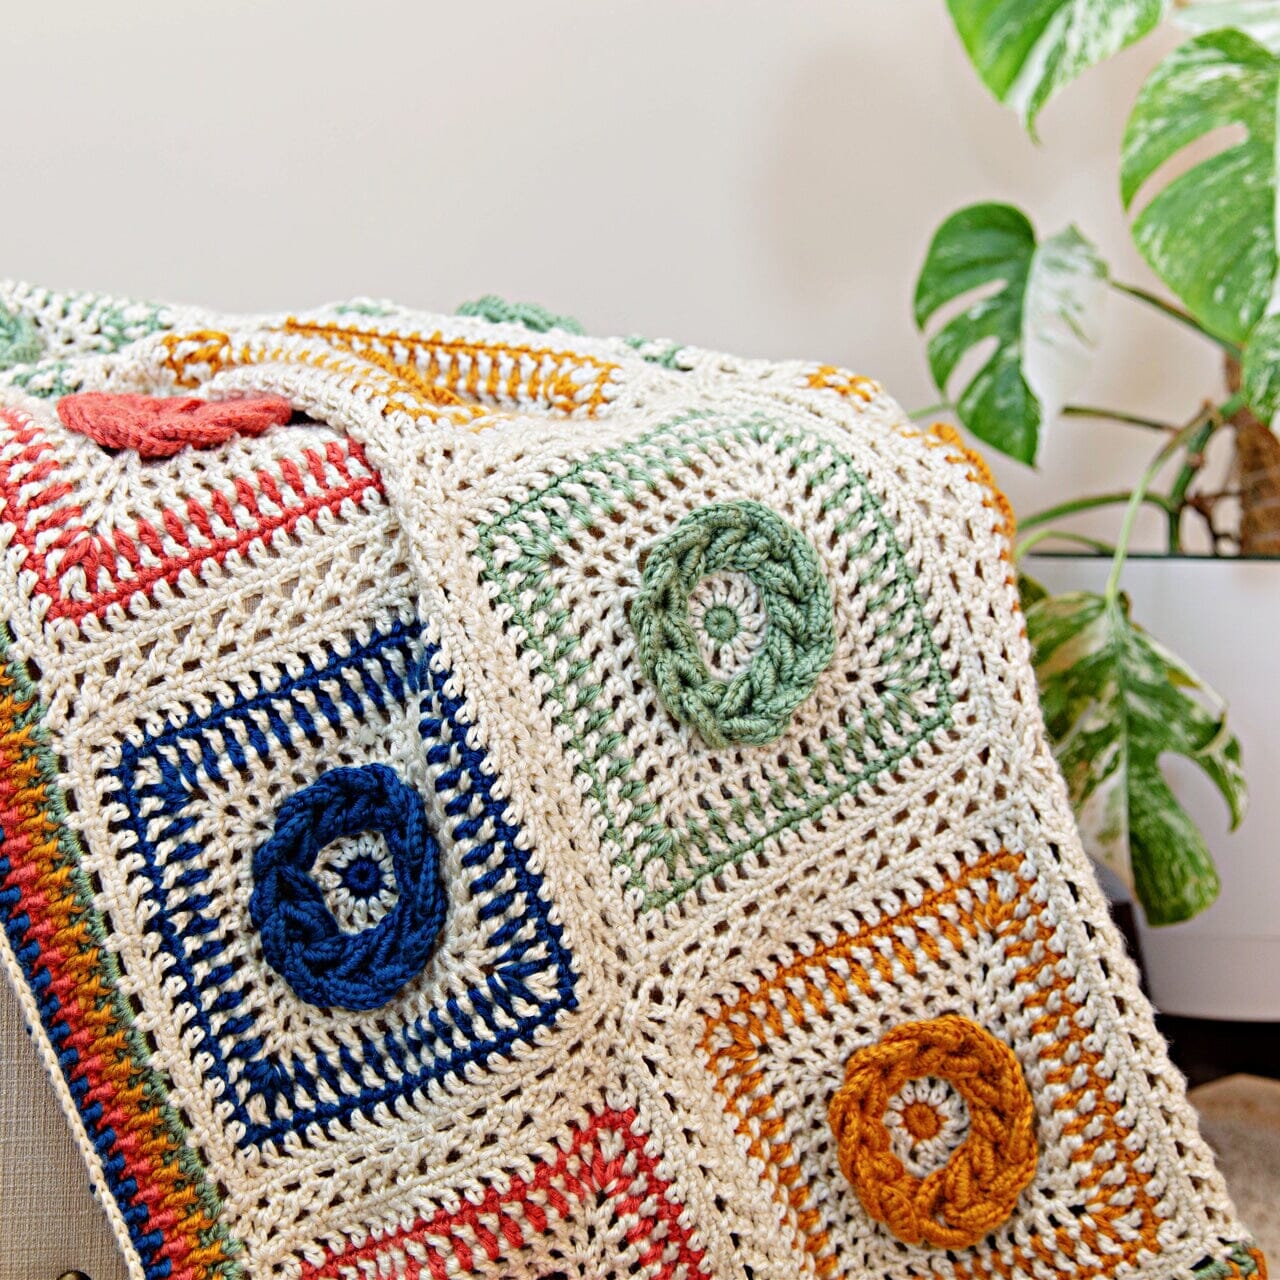 Beginner Crochet Project: Daydream Crochet Blanket Kit by Wool and the Gang  - The Craft Blogger